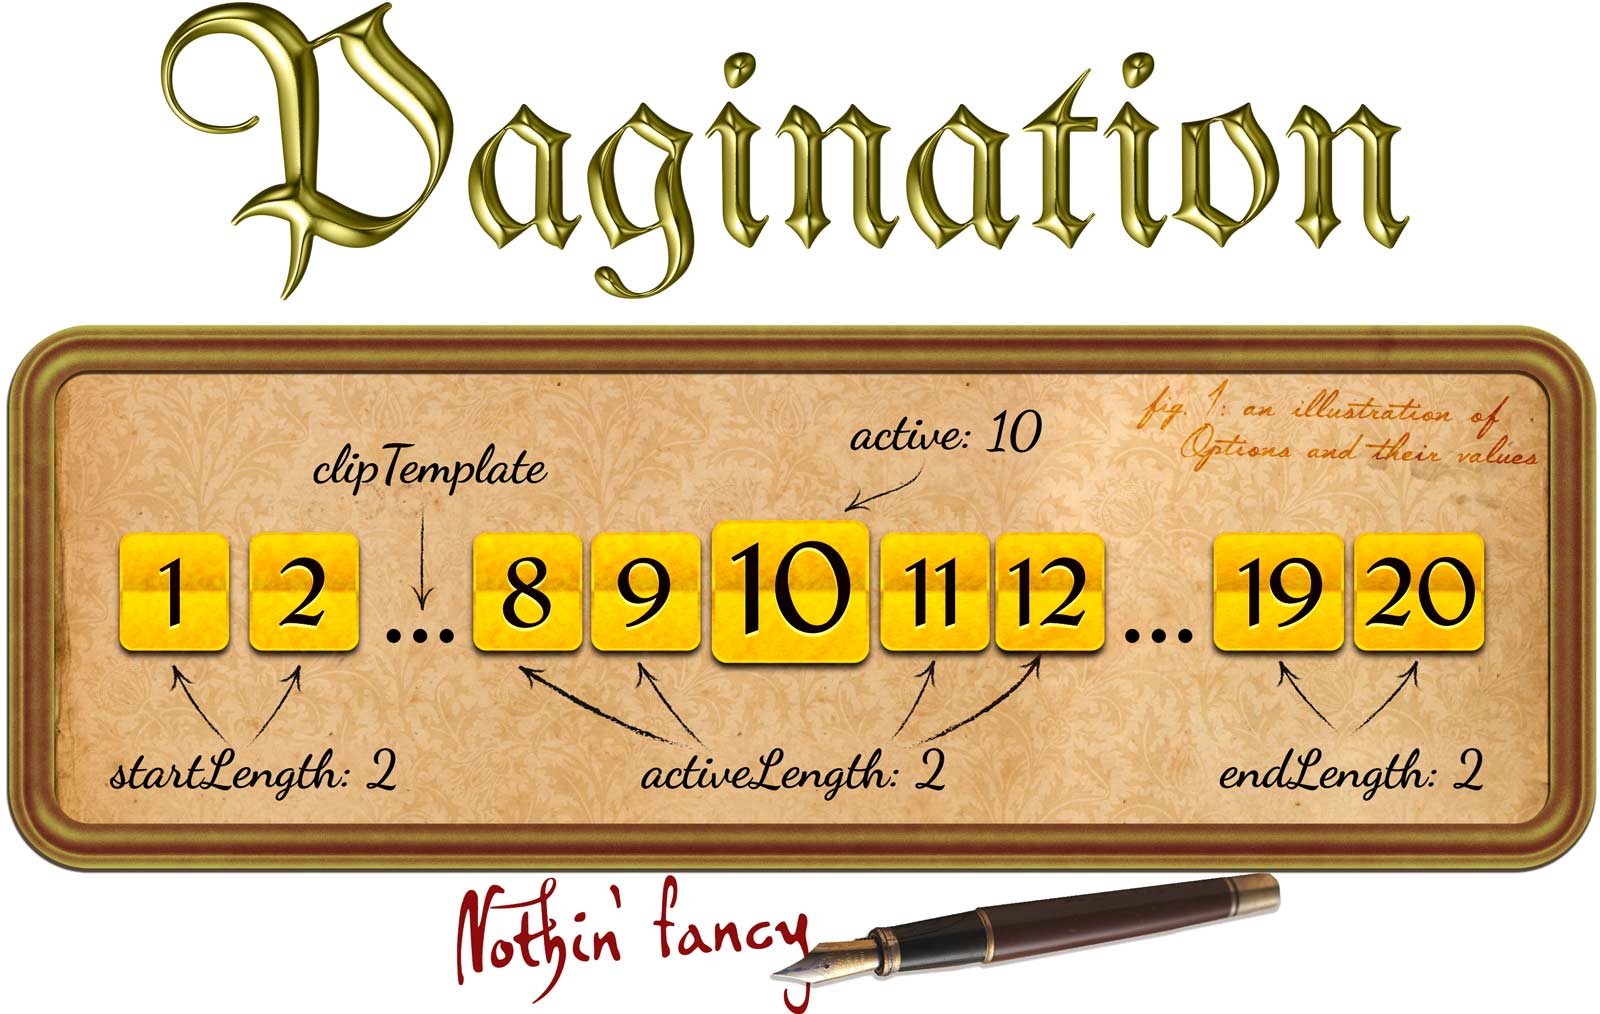 Pagination: Nothin' fancy